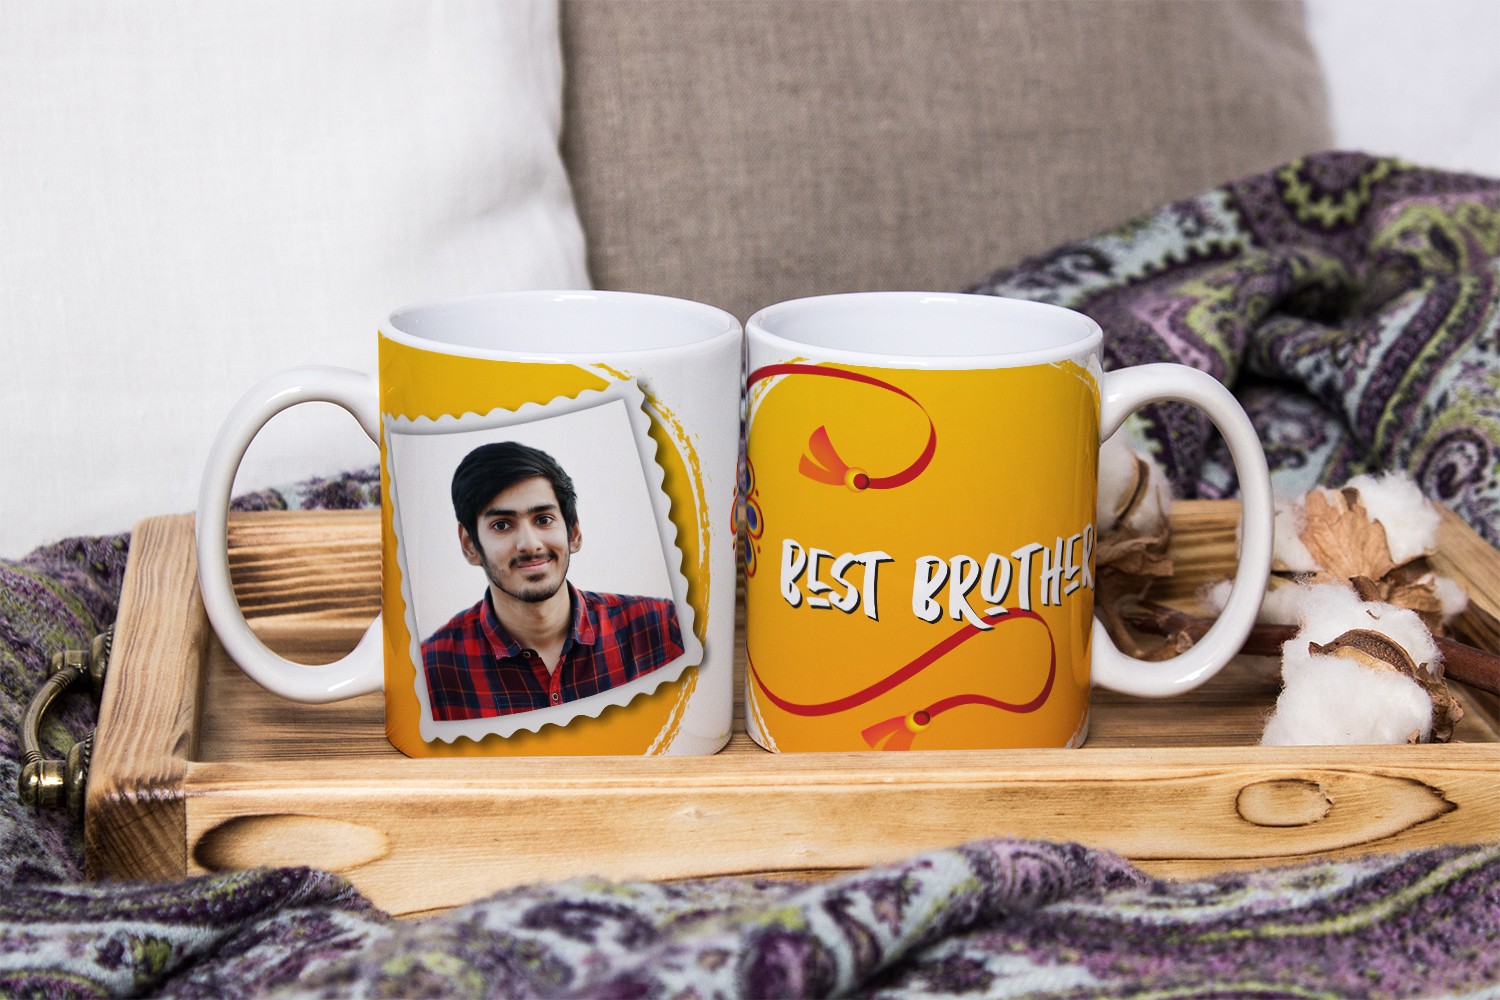 Best Brother personalized Mug